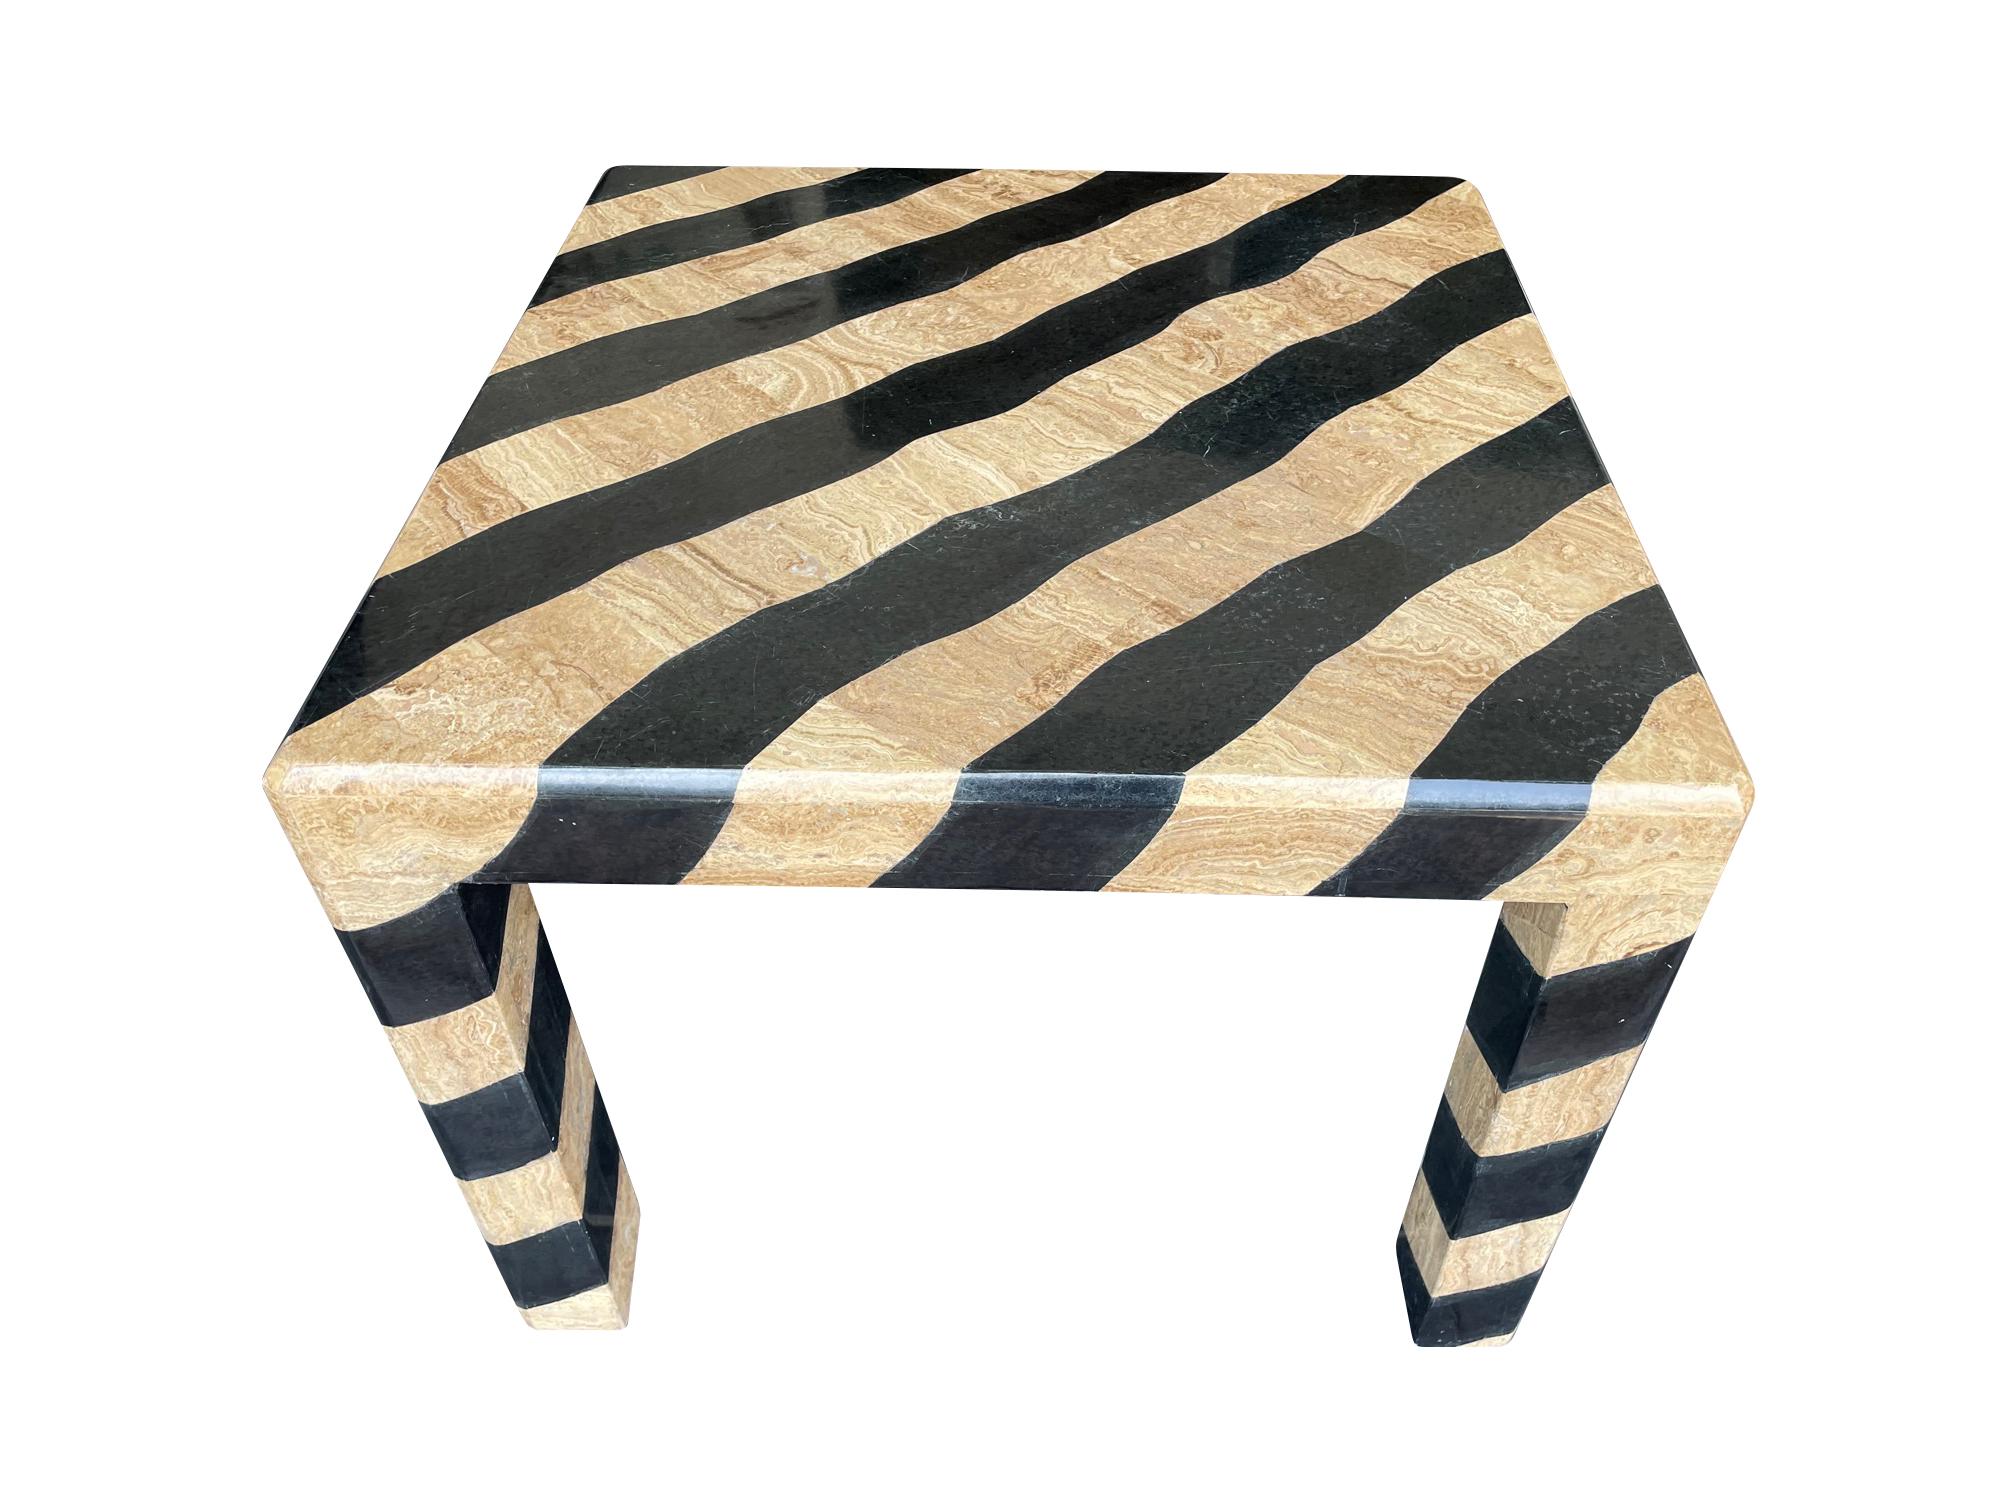 Late 20th Century Maitland Smith Coffee Table with Tessellated Marble Zebra Pattern Finish